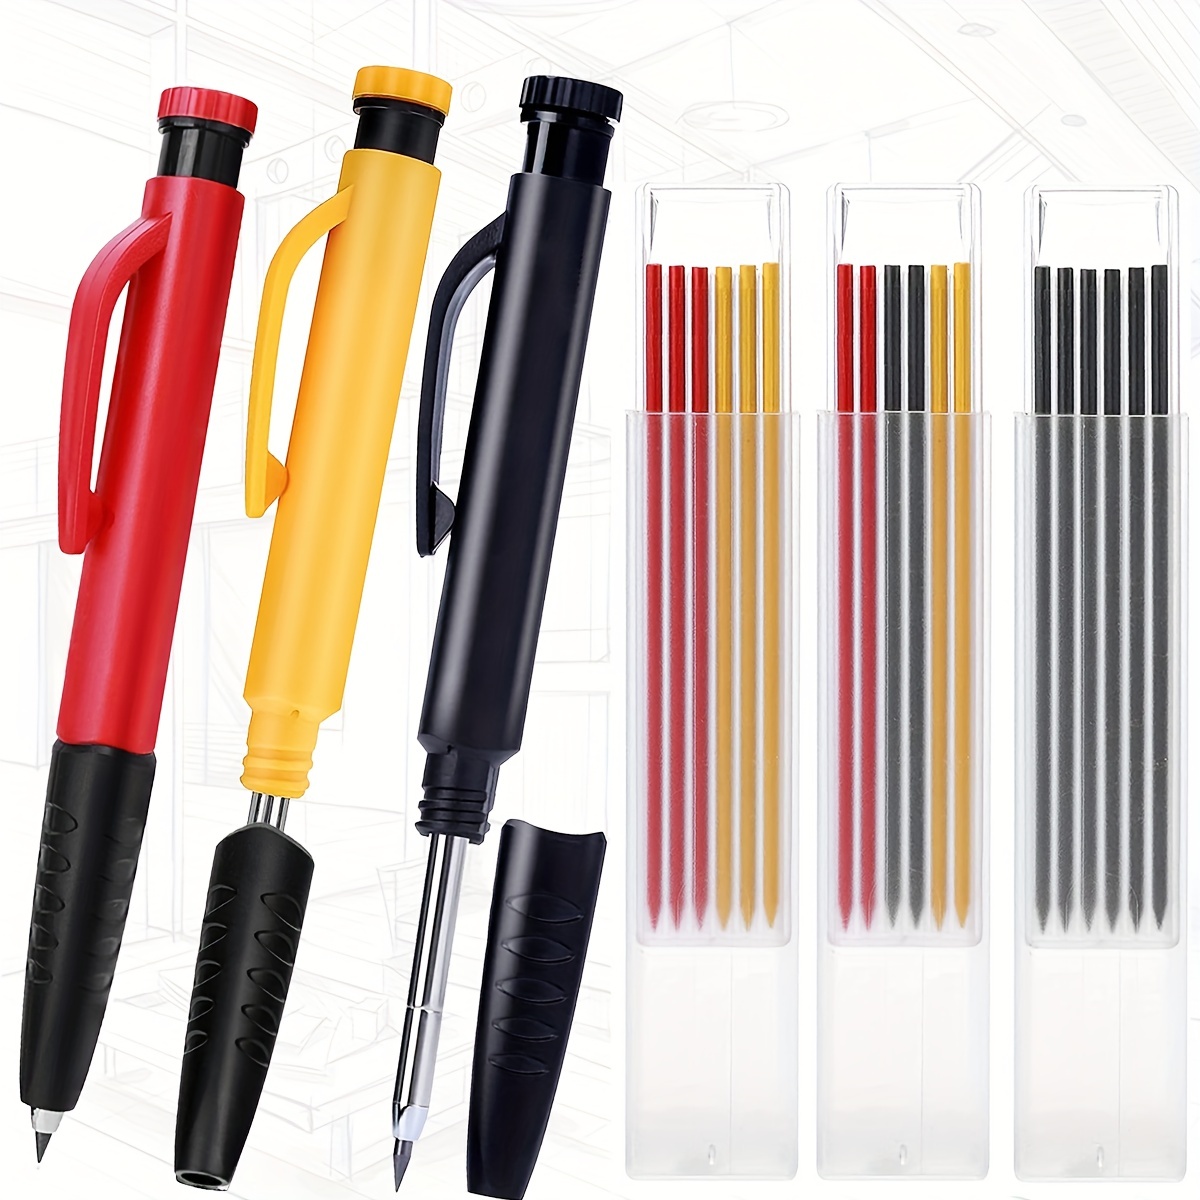 Best Mechanical Pencil For Woodworking